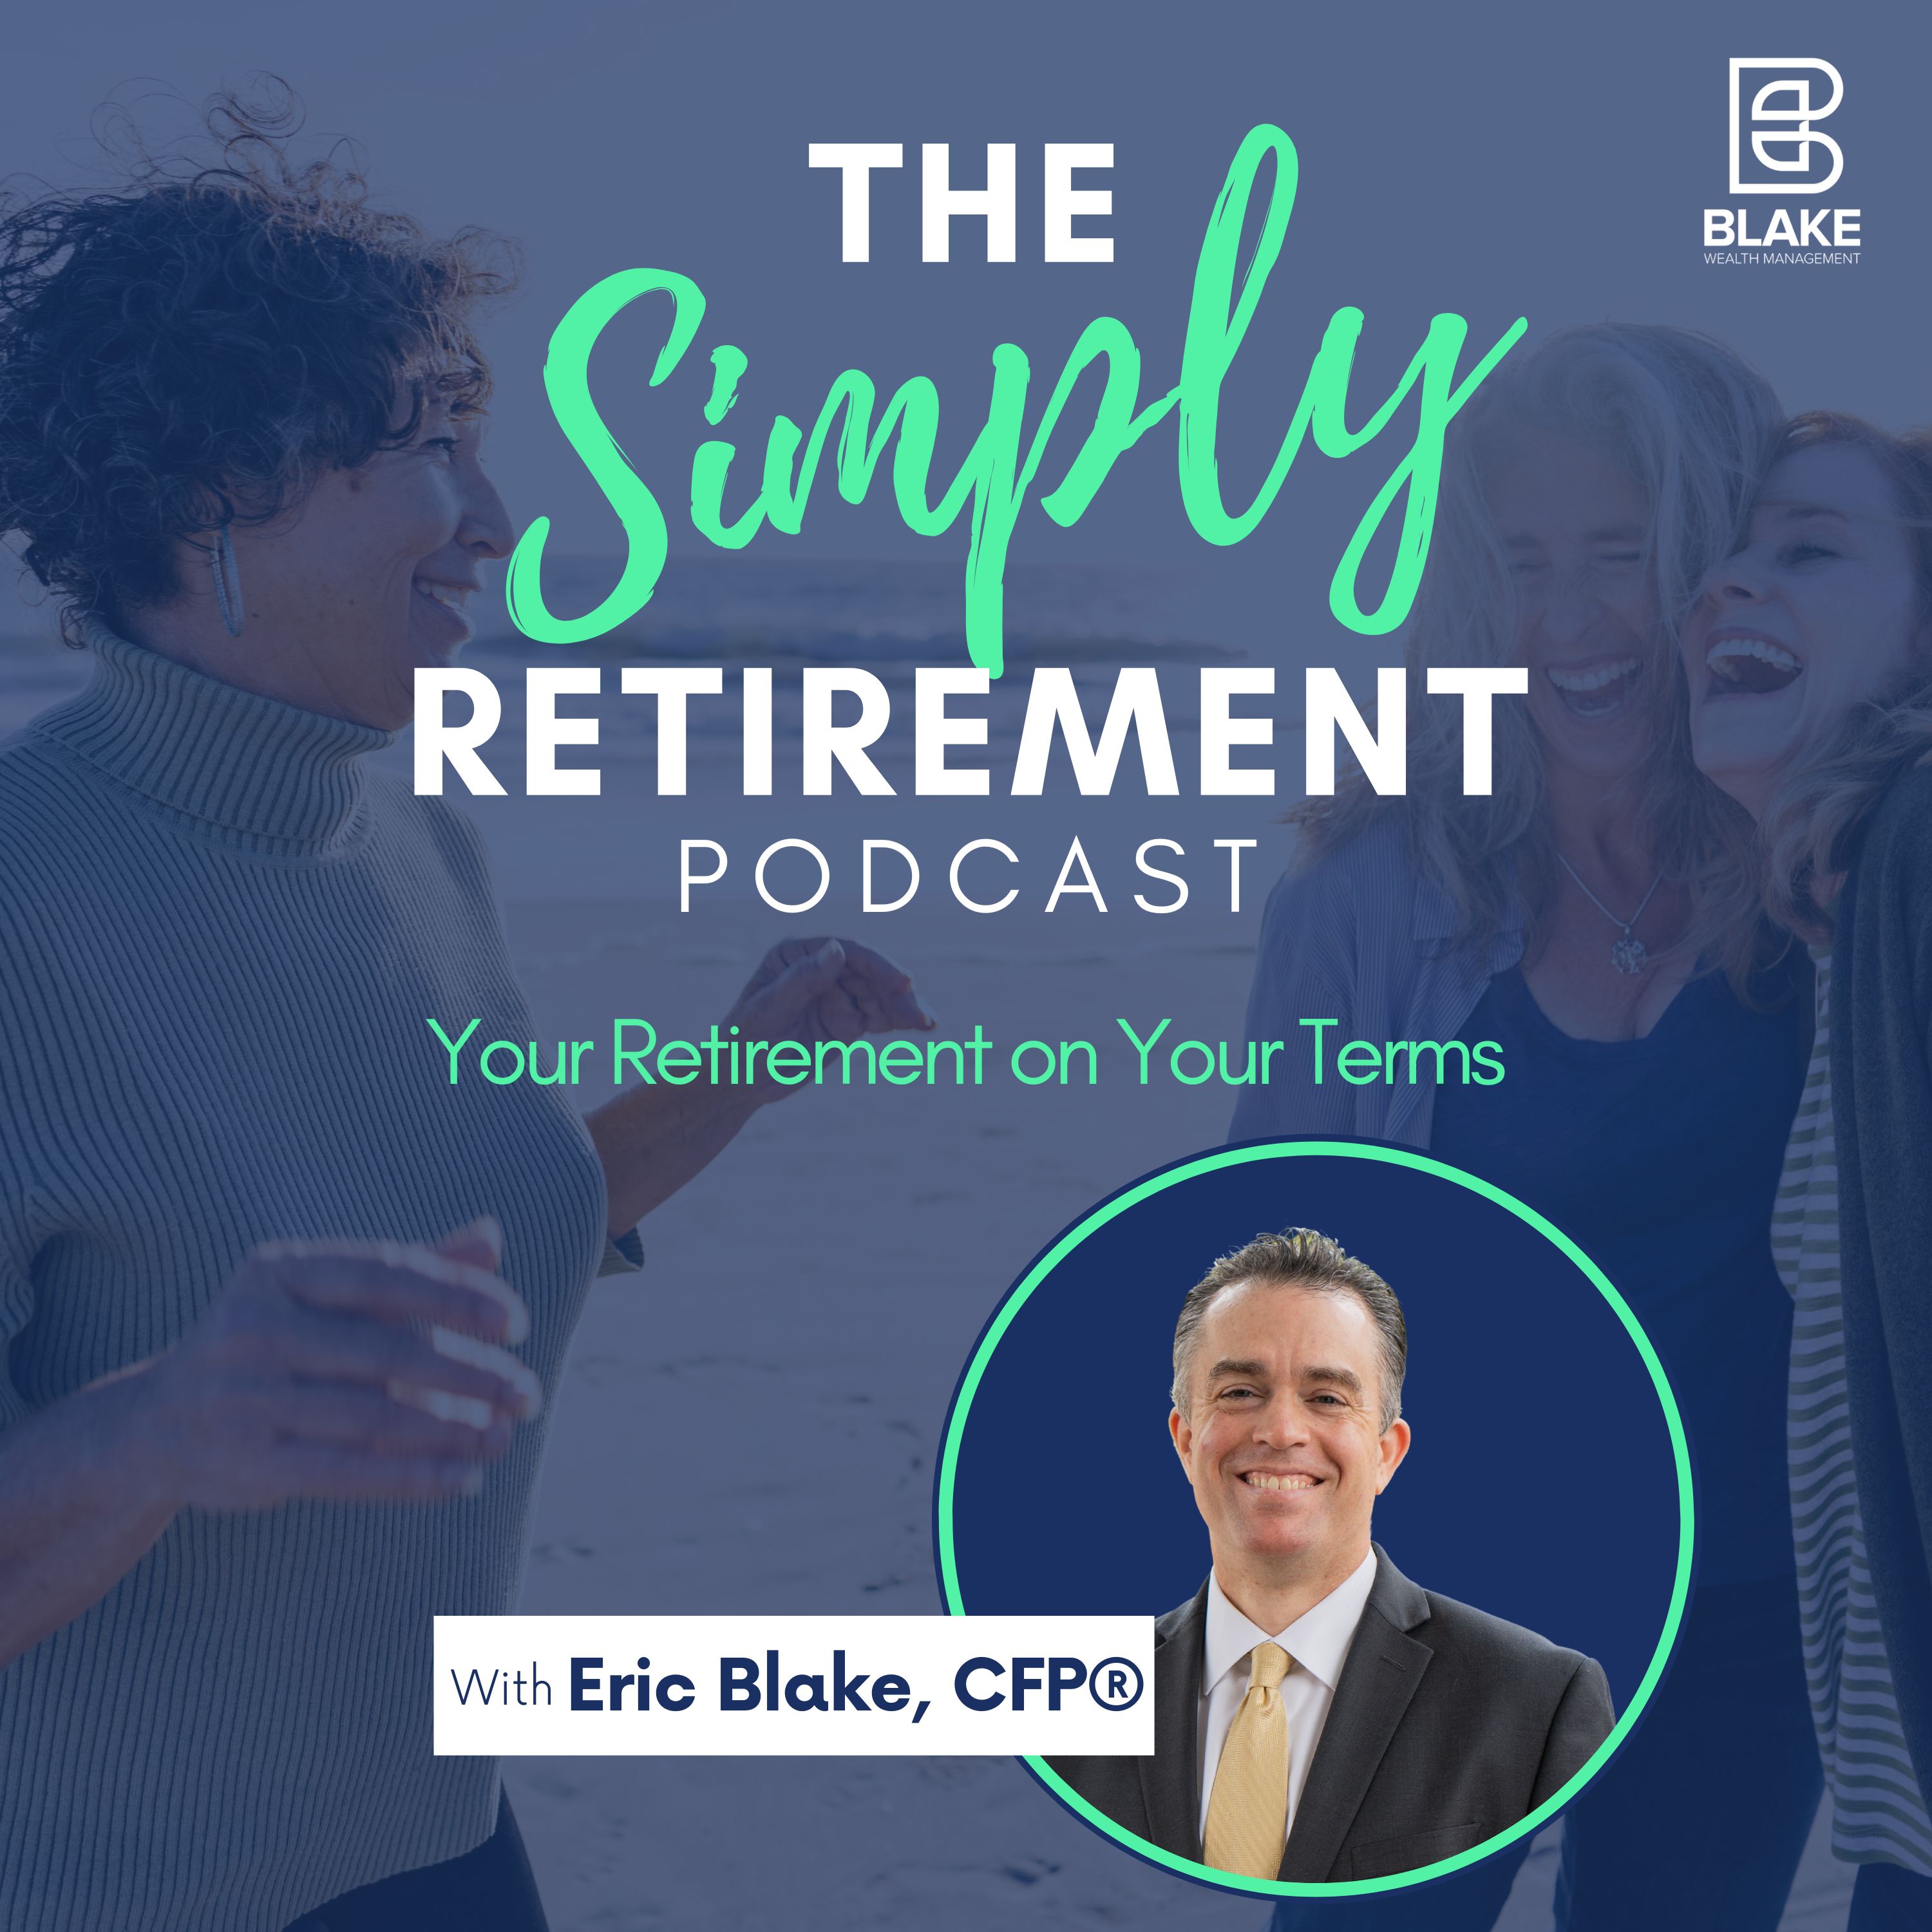 The Simply Retirement Podcast